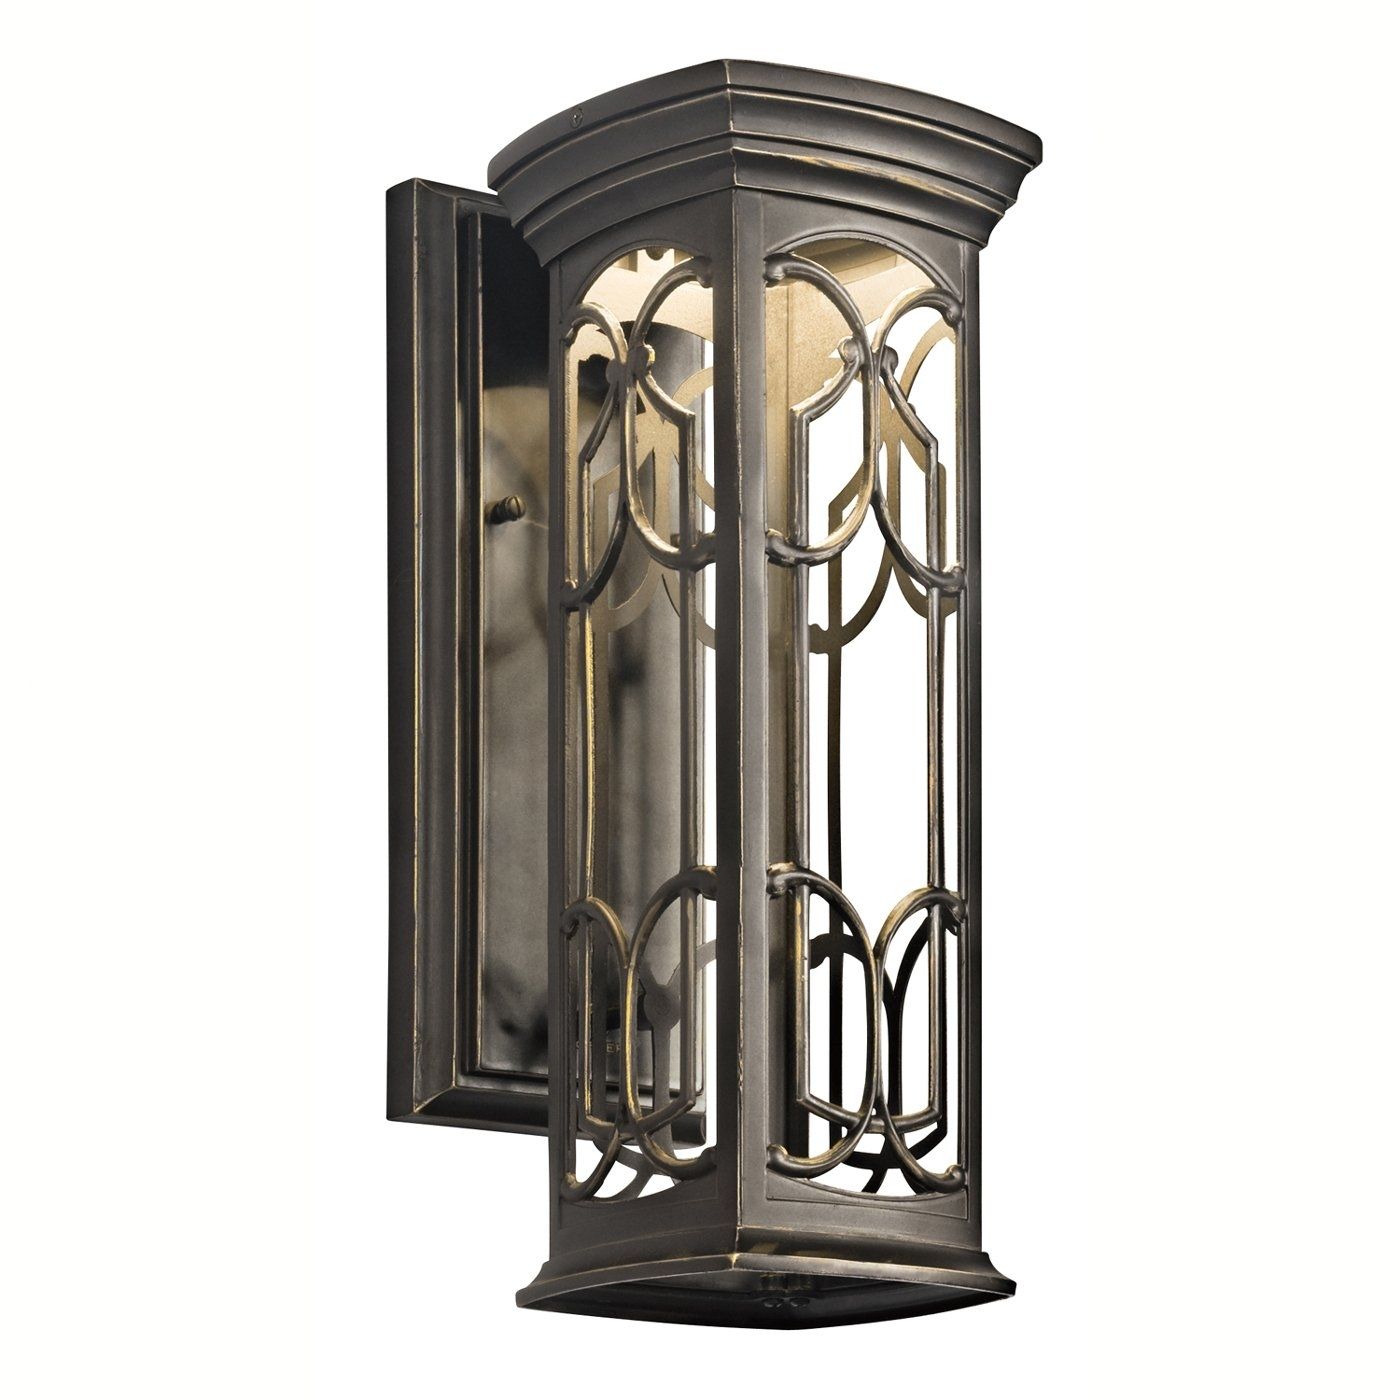 Kichler Lighting 4922 Franceasi Led Outdoor Wall Sconce | Lowe's Canada In Outdoor Wall Led Kichler Lighting (View 11 of 15)